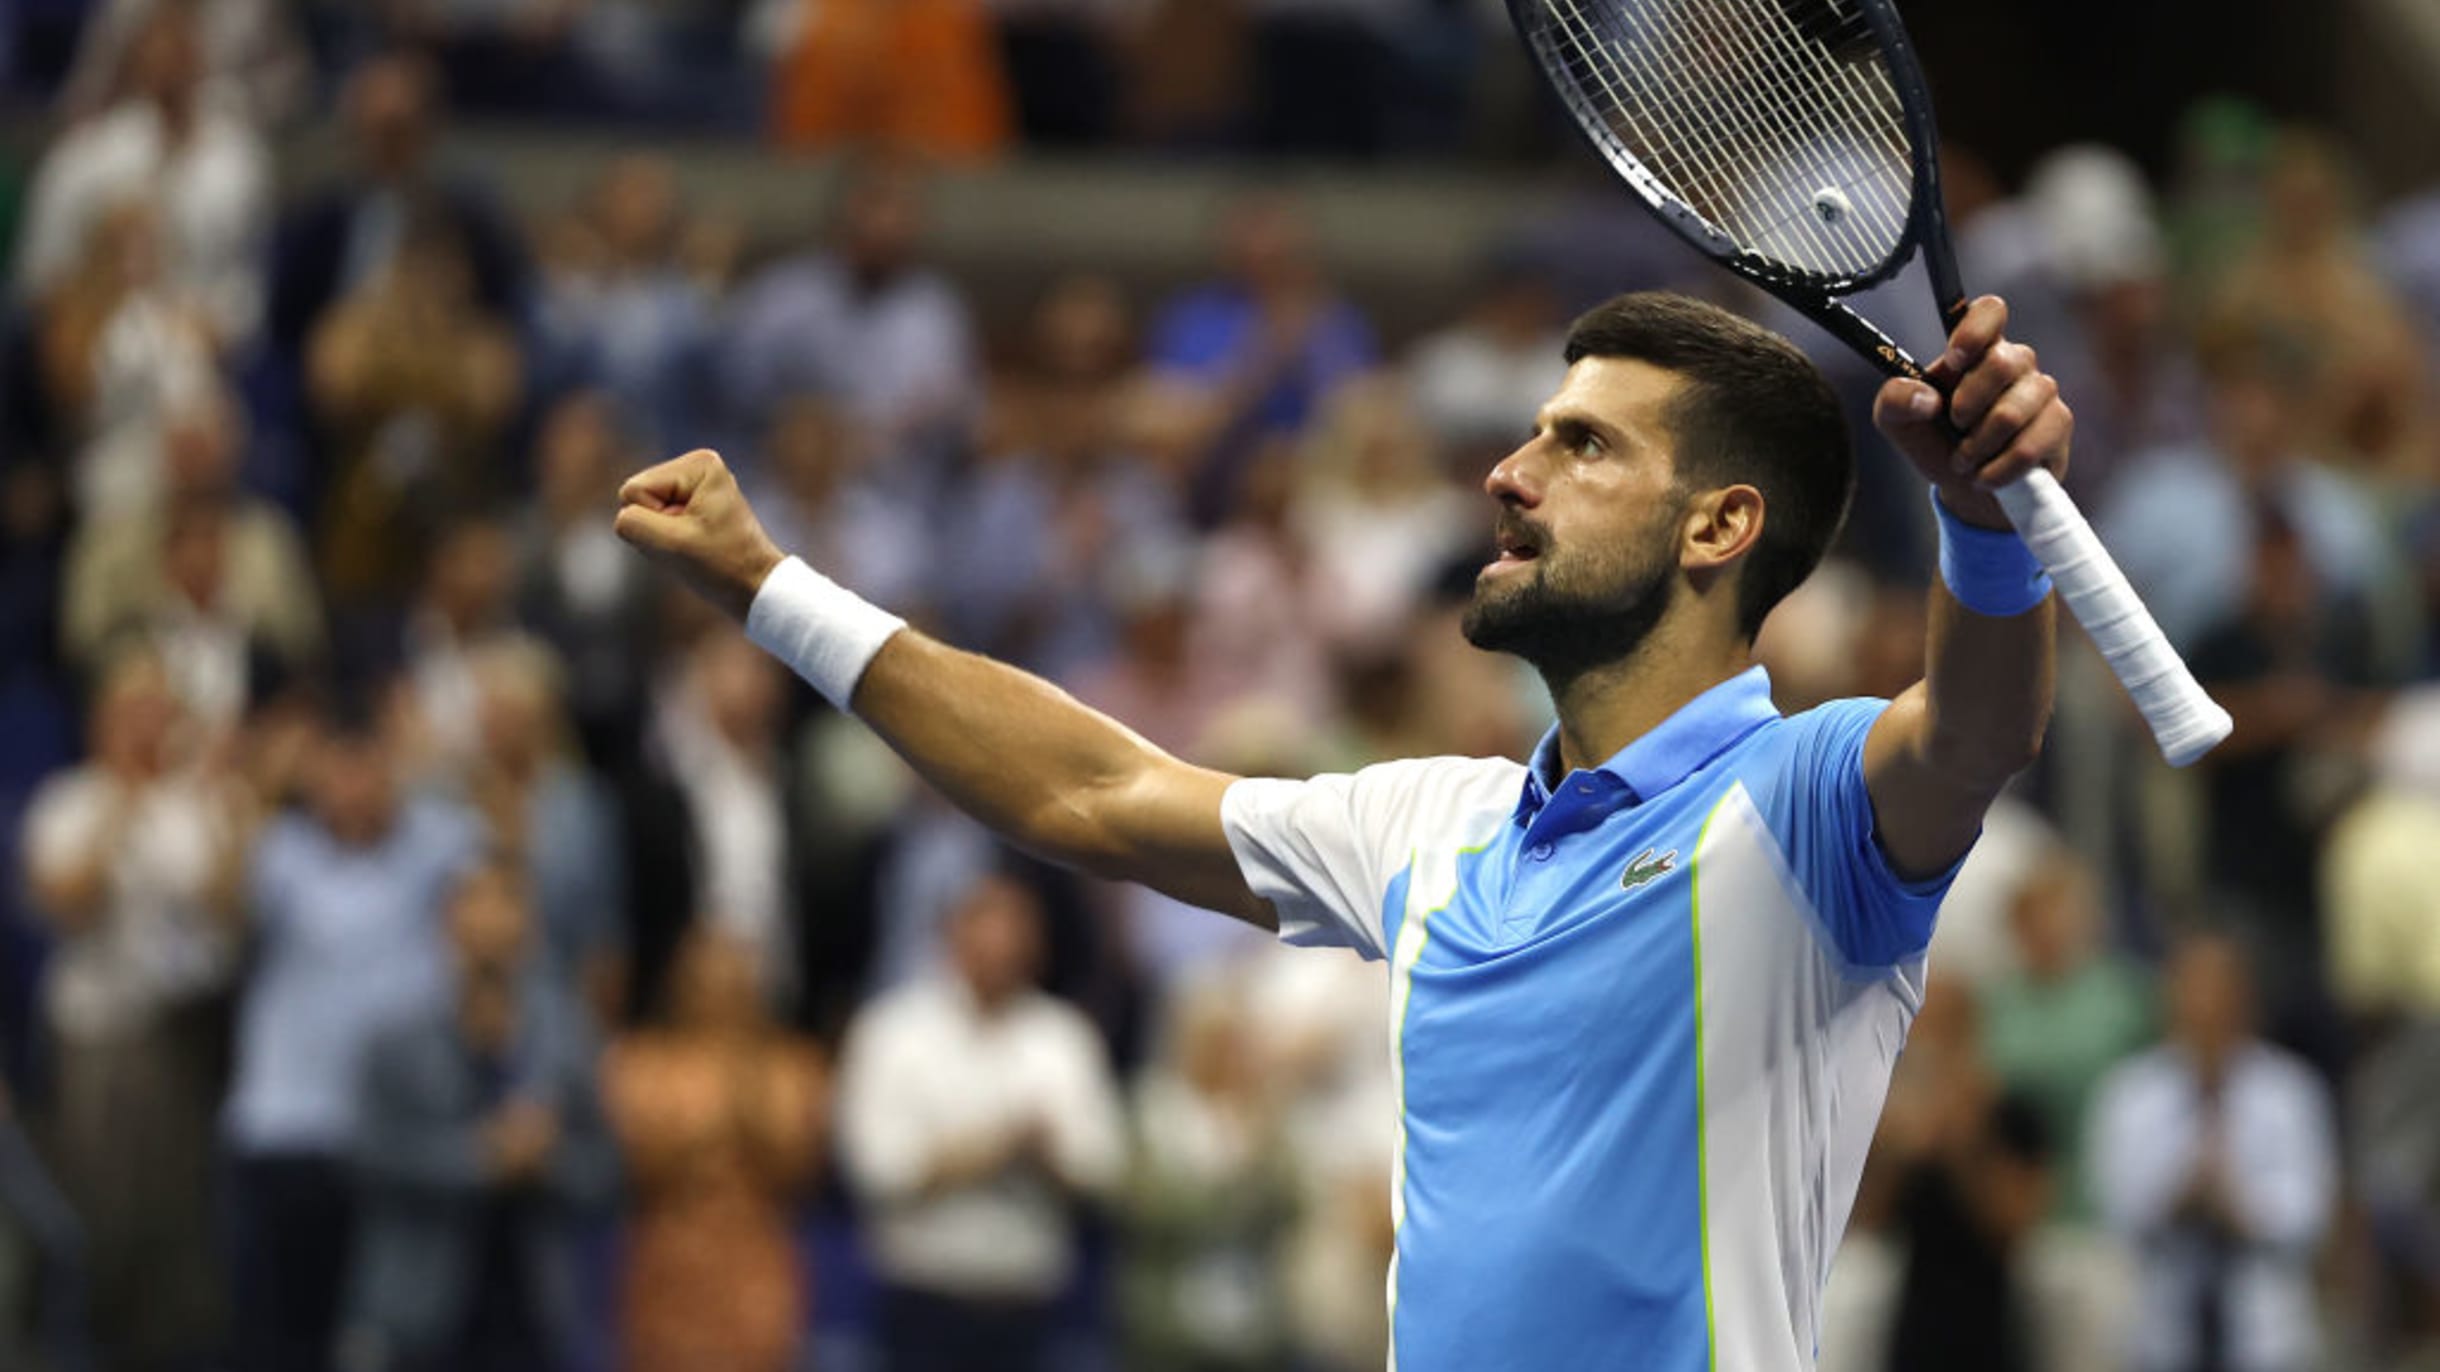 Novak Djokovic vs Daniil Medvedev, US Open 2023 mens tennis final Get match time and watch live streaming and telecast in India